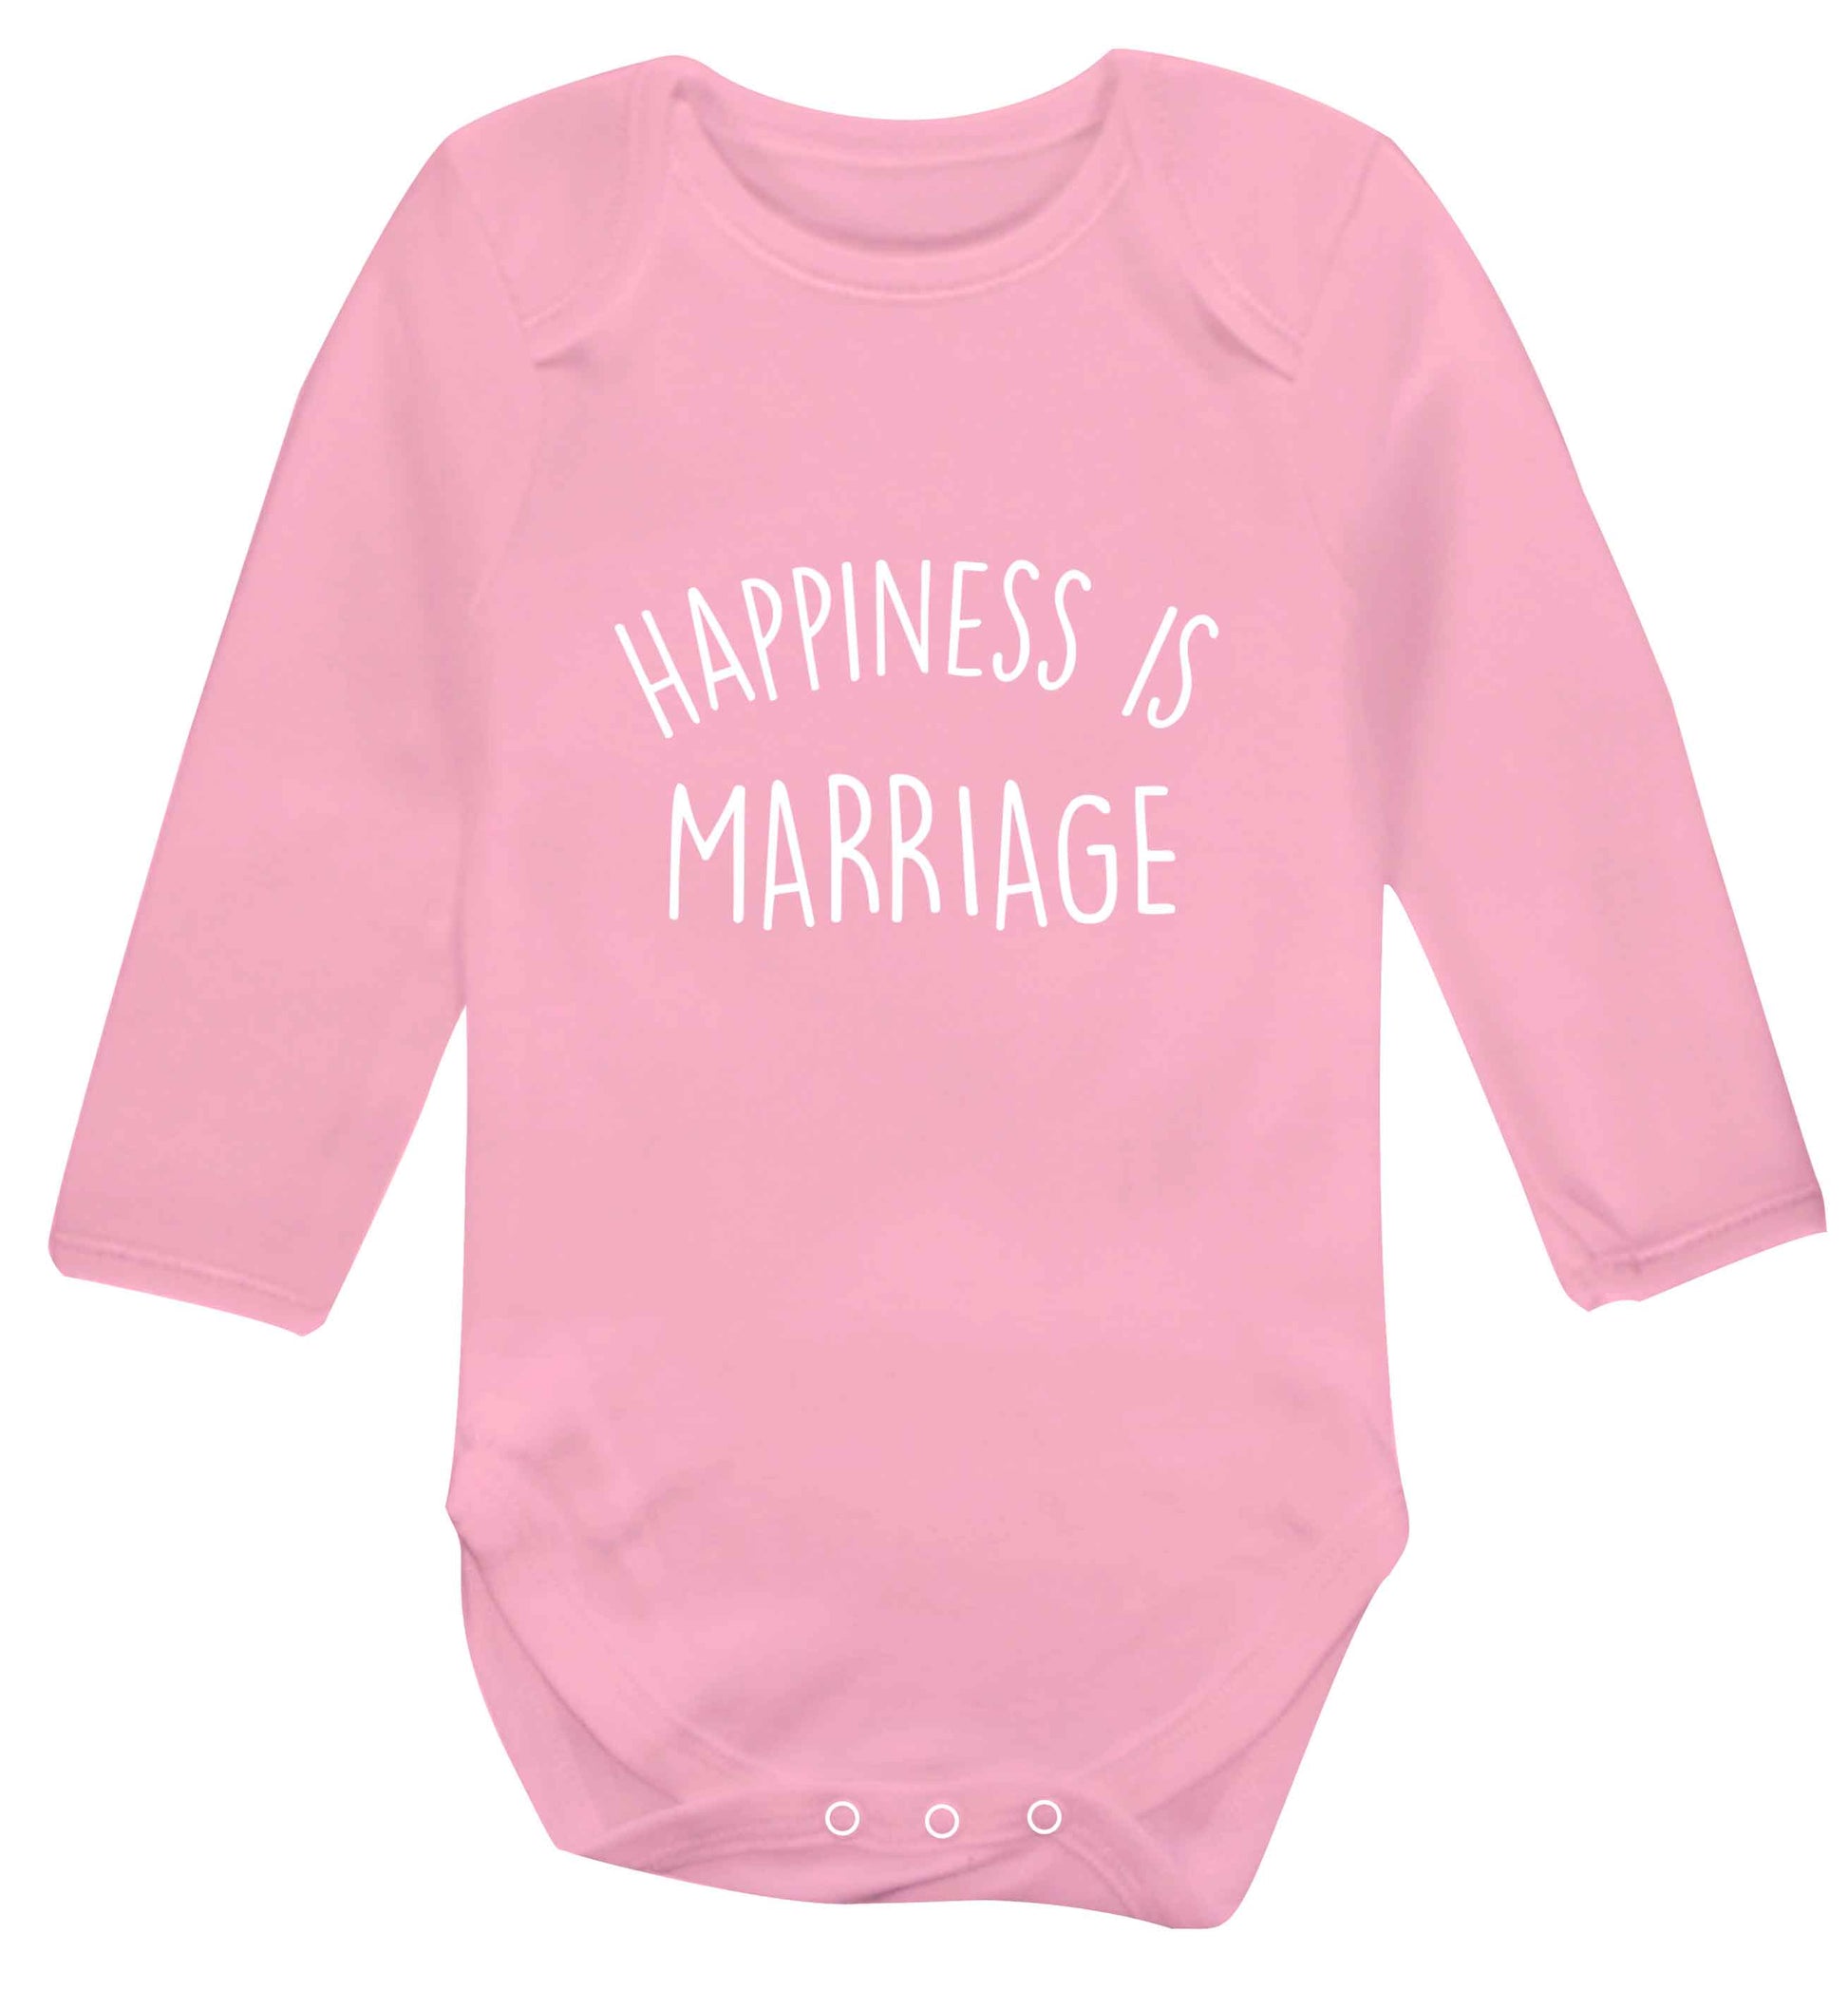 Happiness is wedding planning baby vest long sleeved pale pink 6-12 months